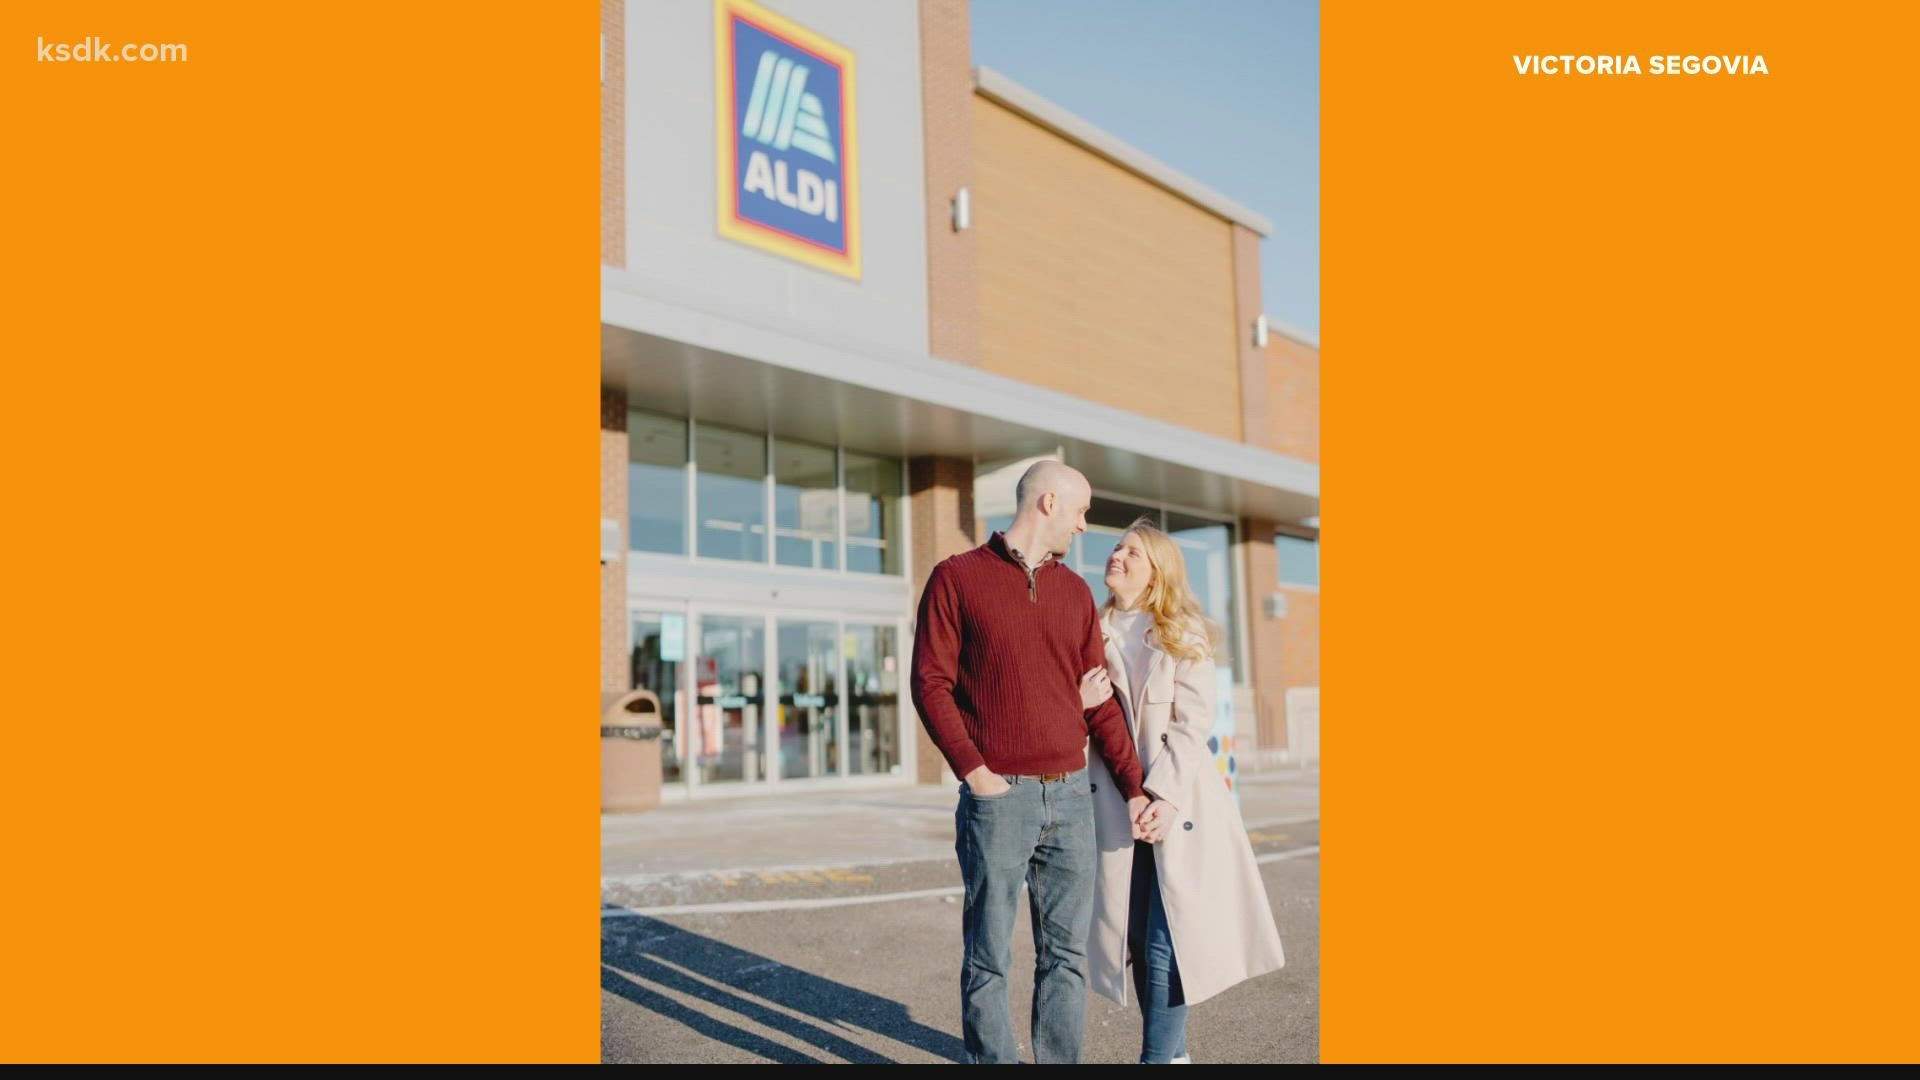 Shannon and Dan got their photos taken at the grocery store. They said they bonded over their shared love of Aldi.